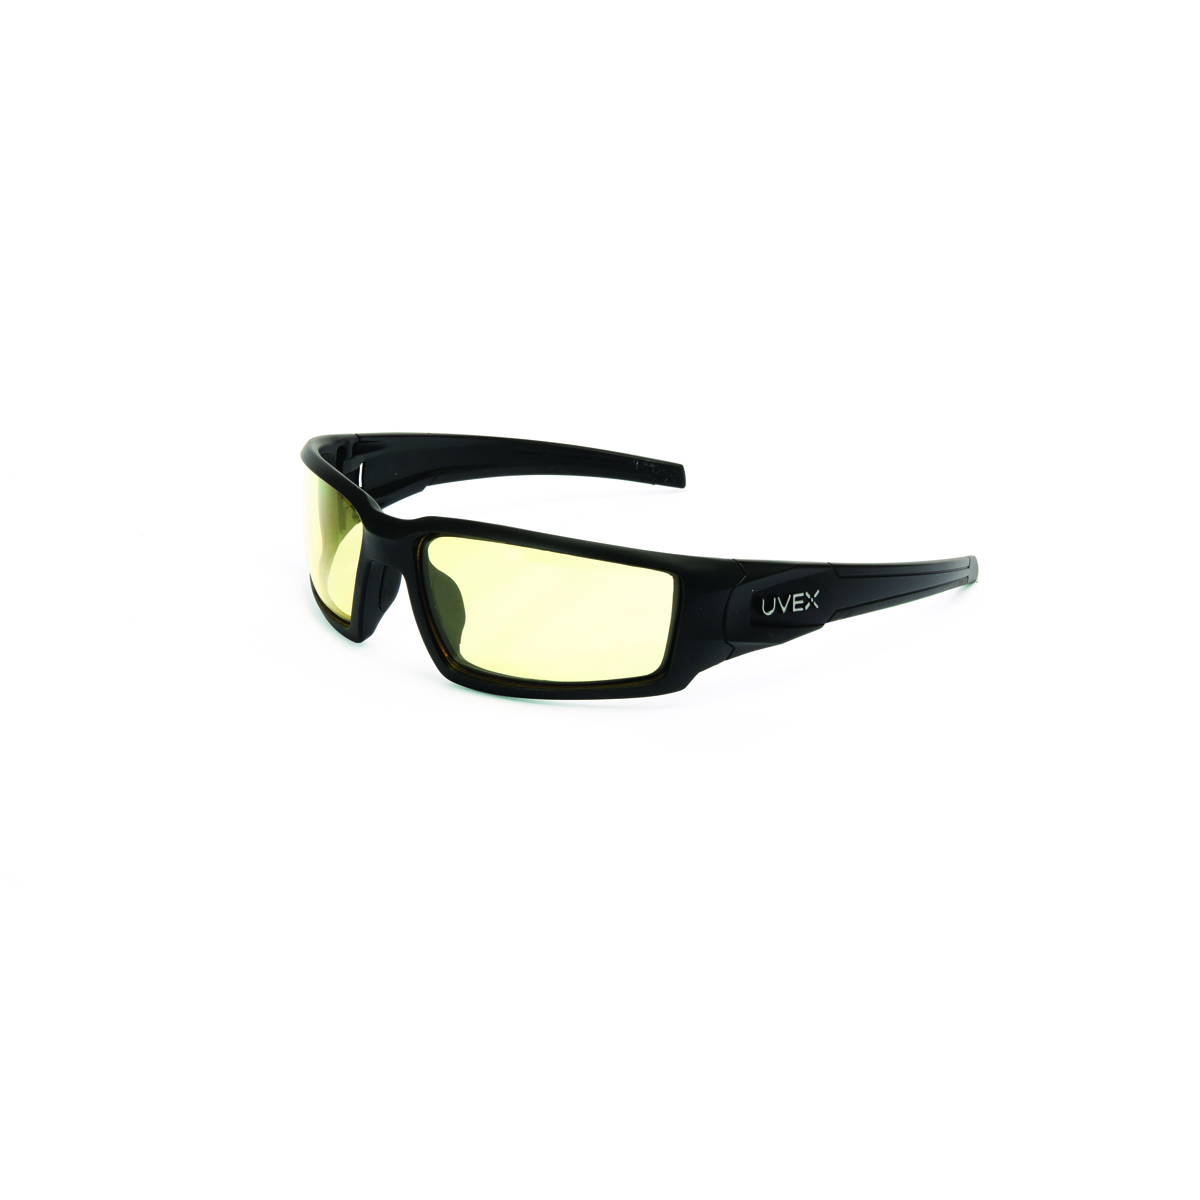 Honeywell Uvex Hypershock® Black Safety Glasses With Amber Anti-Fog Lens (Availability restrictions apply.)